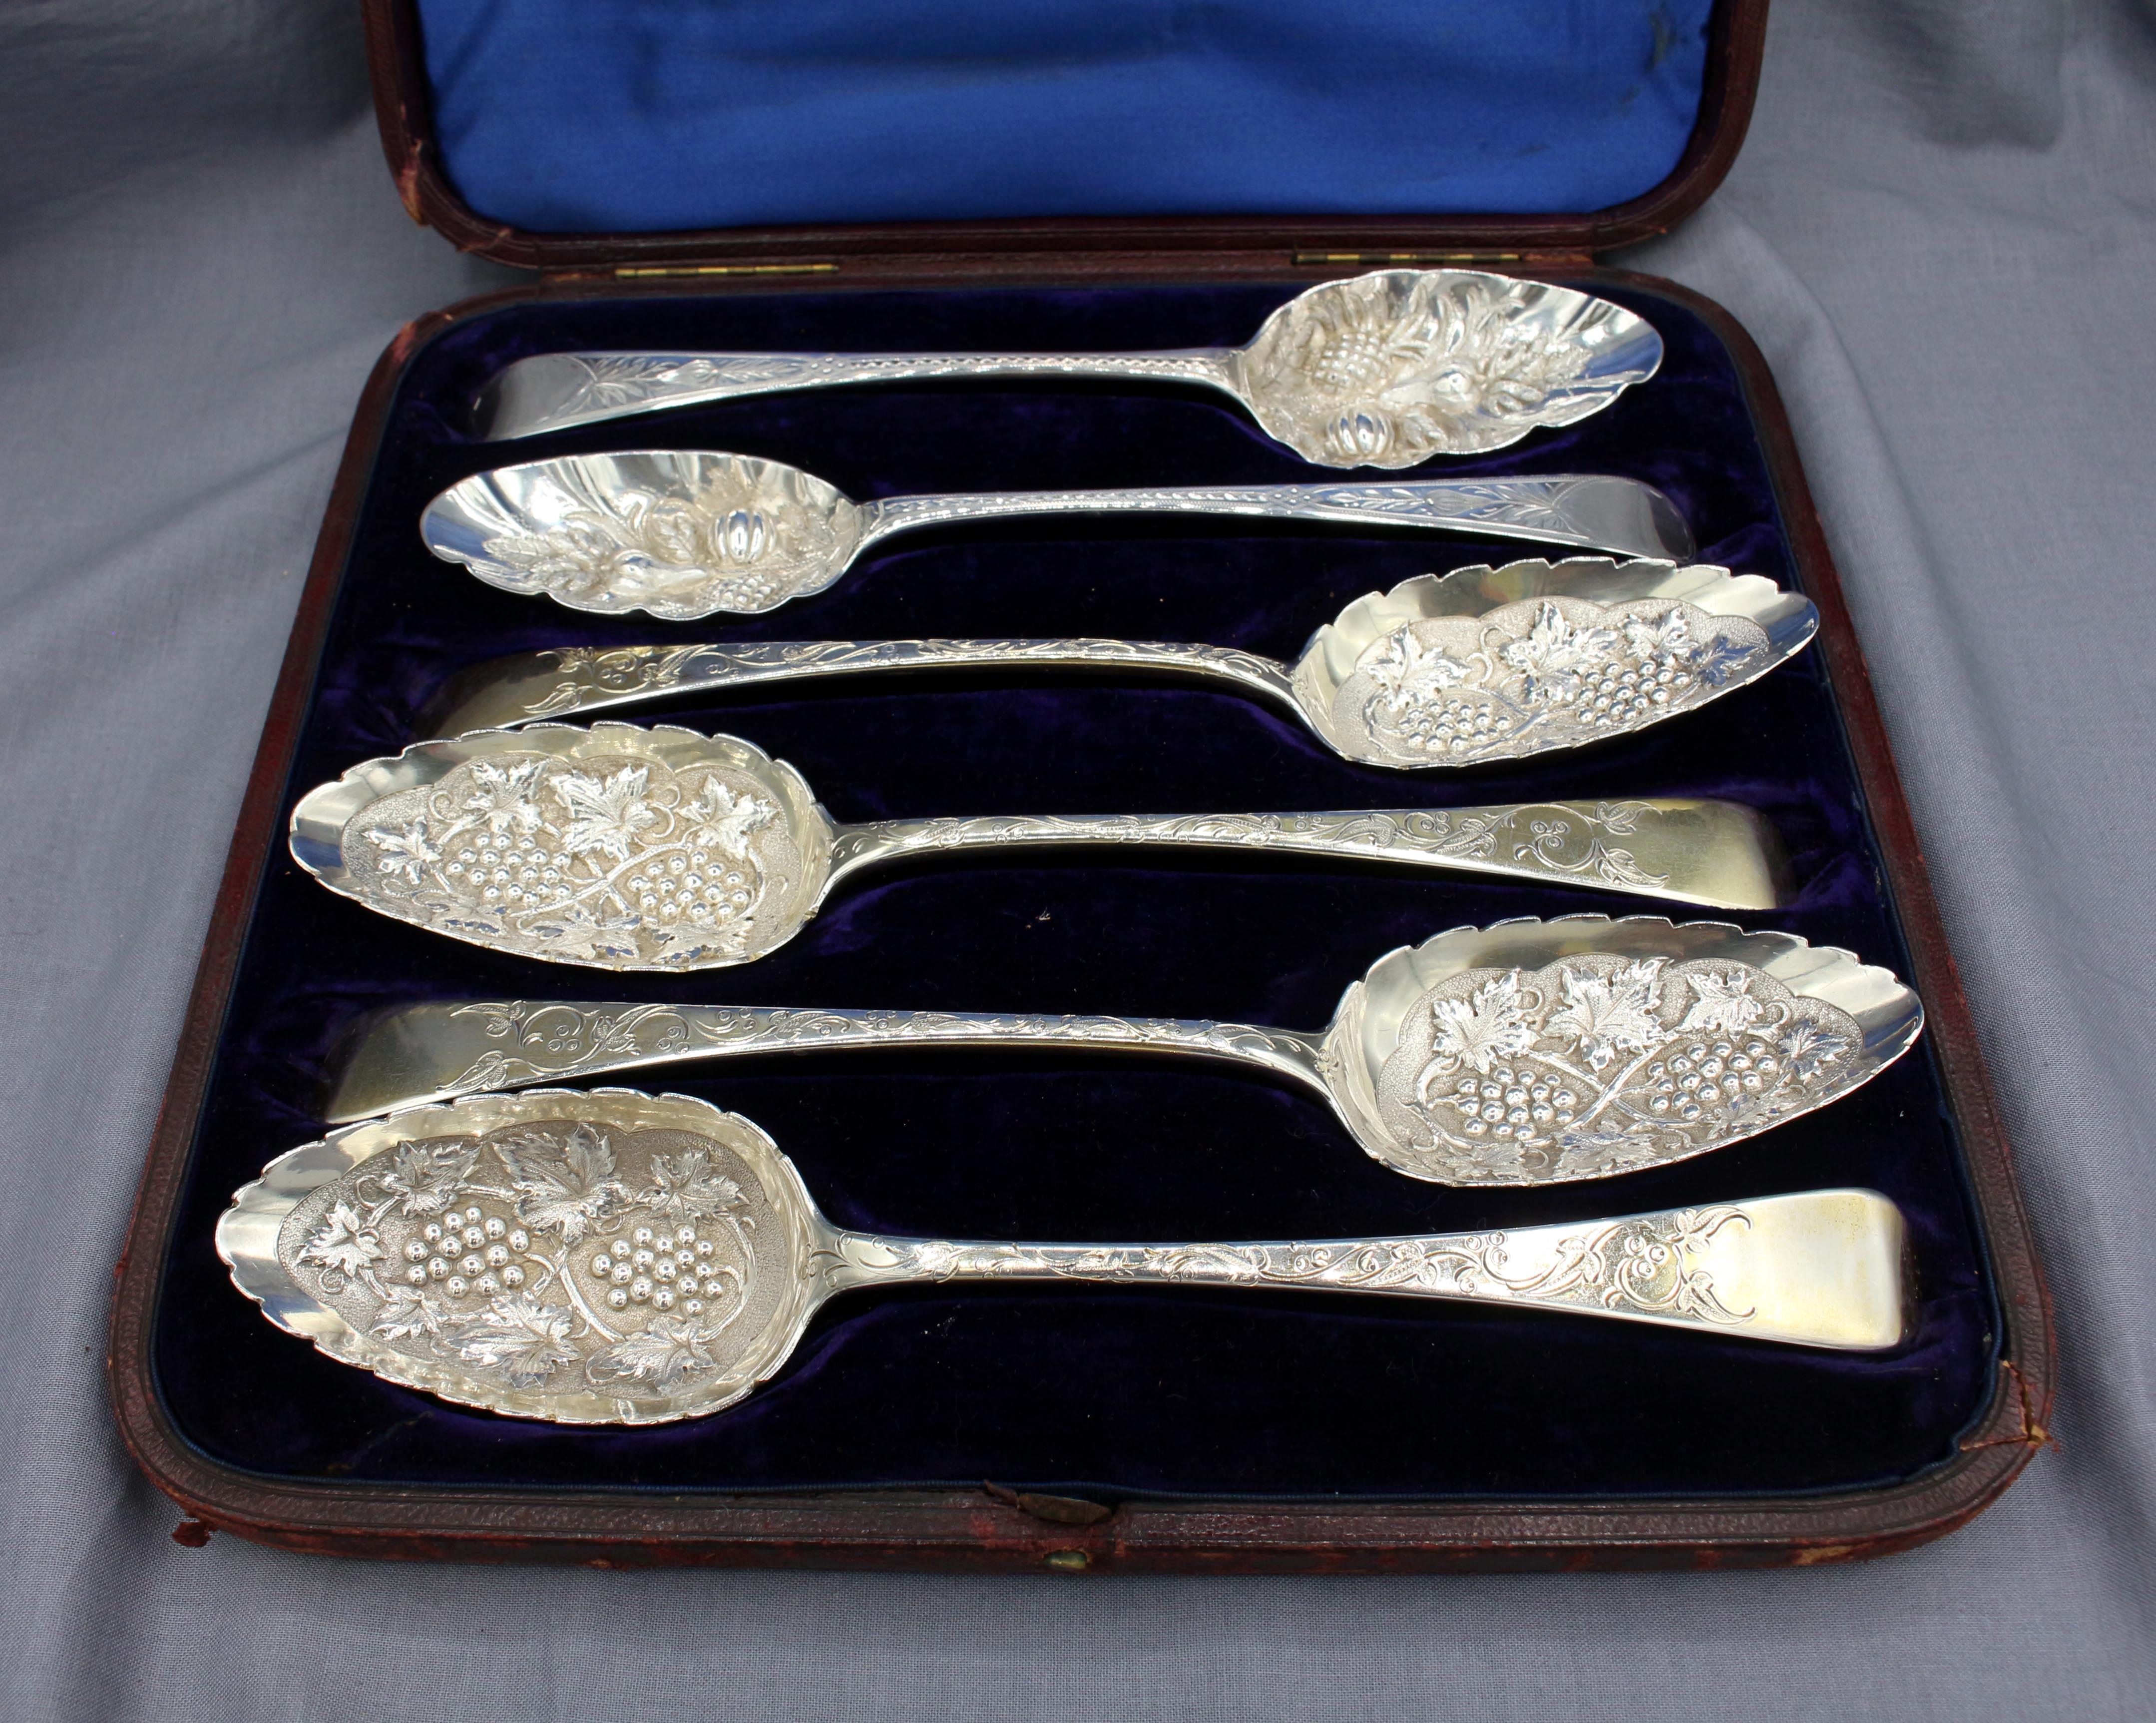 1798 & 1822 boxed set of 6 dessert or fruit serving spoons, English. 2 pattern by 2 makers. Georgian with typical Victorian conversion for a gift. Set of 4 with grapes & leaves bowls: London, 1822, Richard Britton (1st mark). Pair with bold